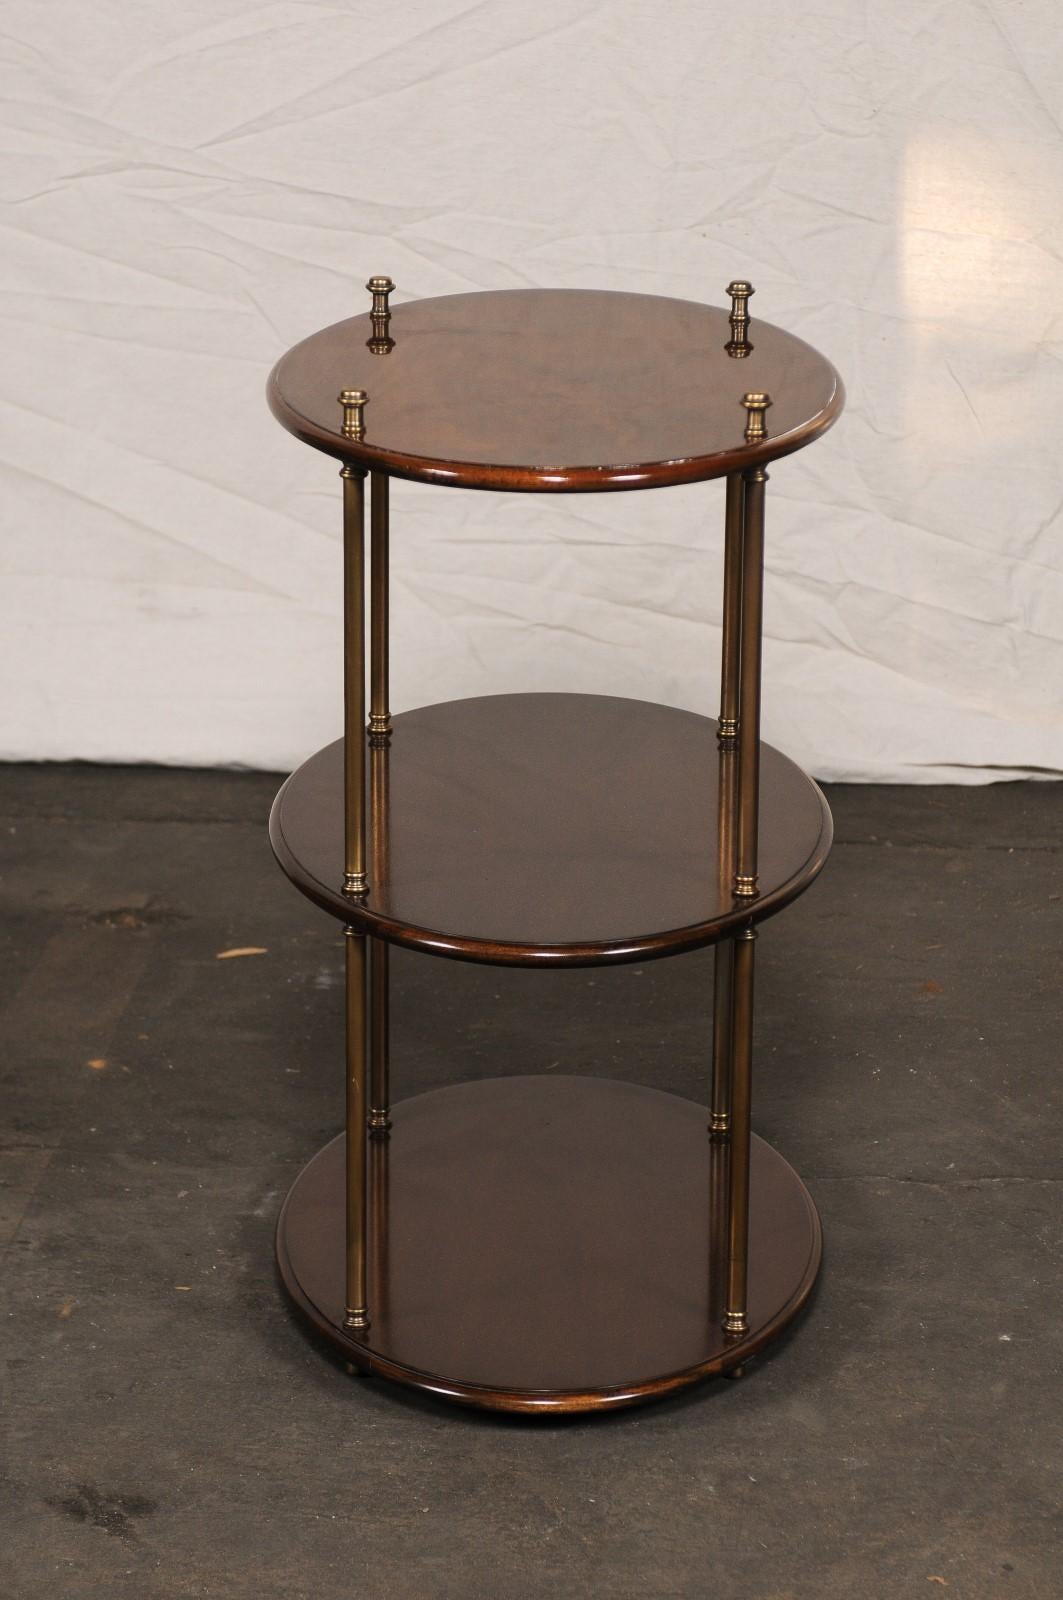 19th-20th Century English Mahogany & Brass Three-Tier Oval Étagère For Sale 2